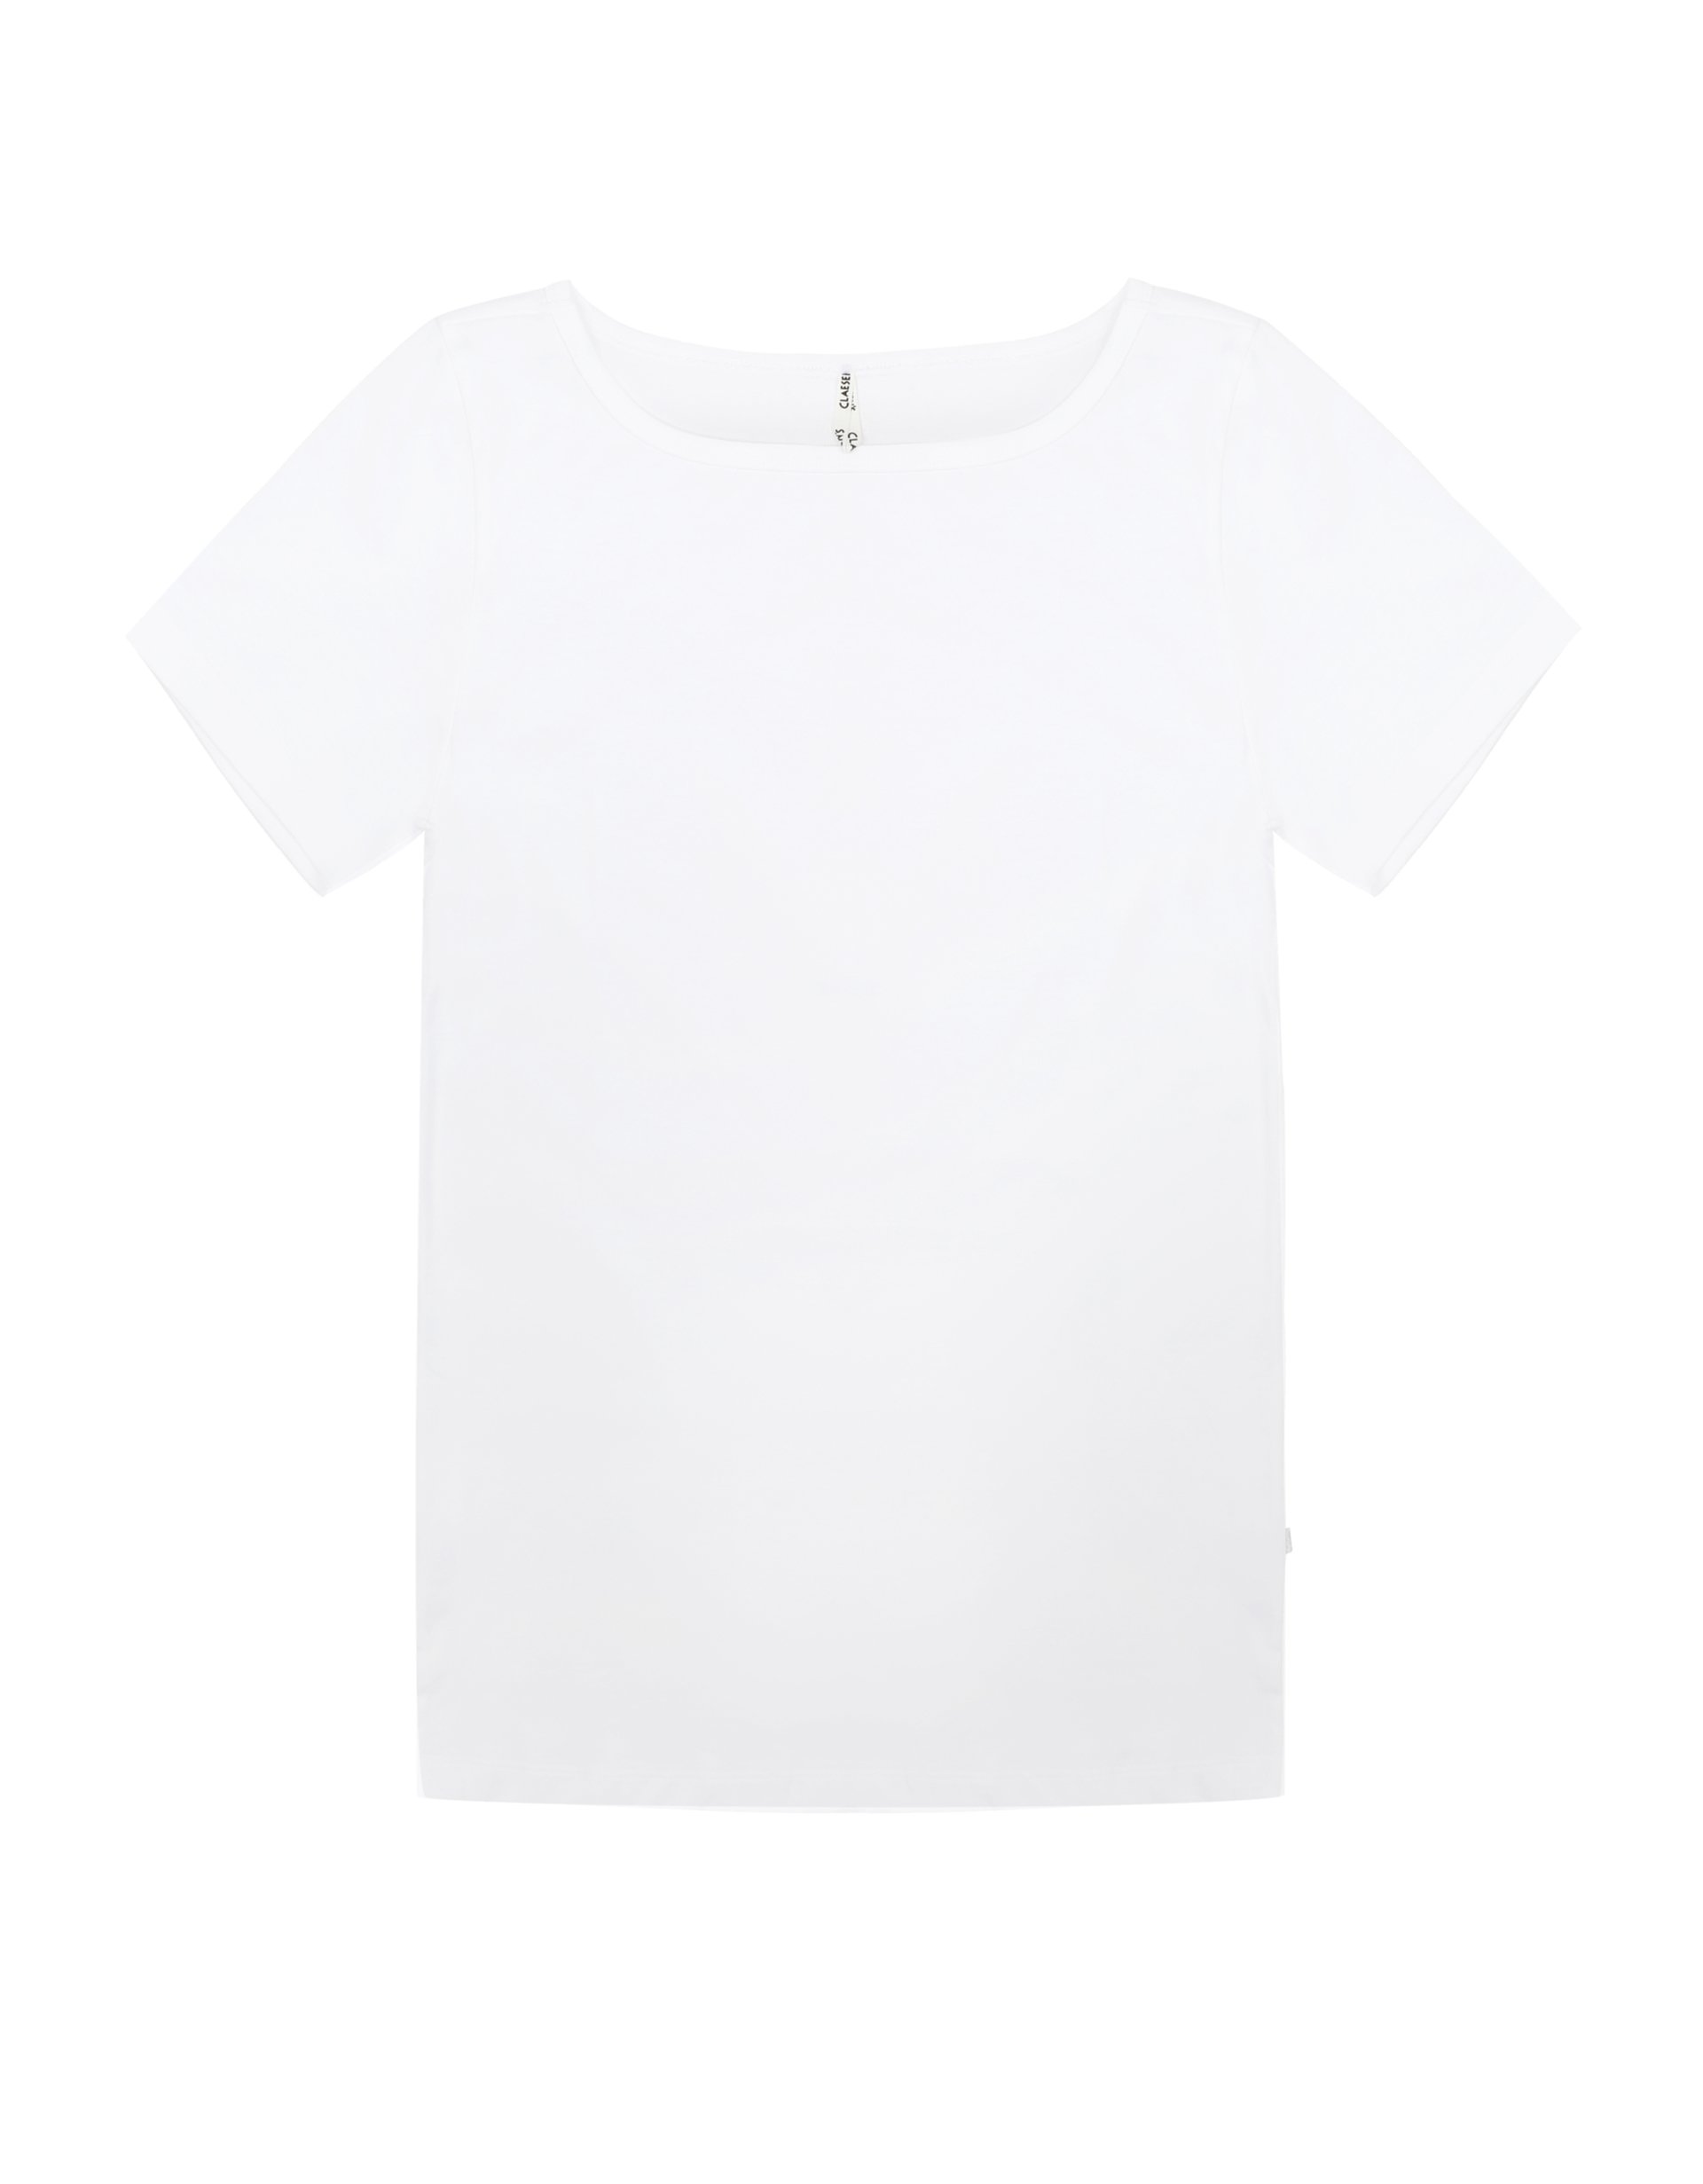 Loose Fit Boat Neck T shirt SS